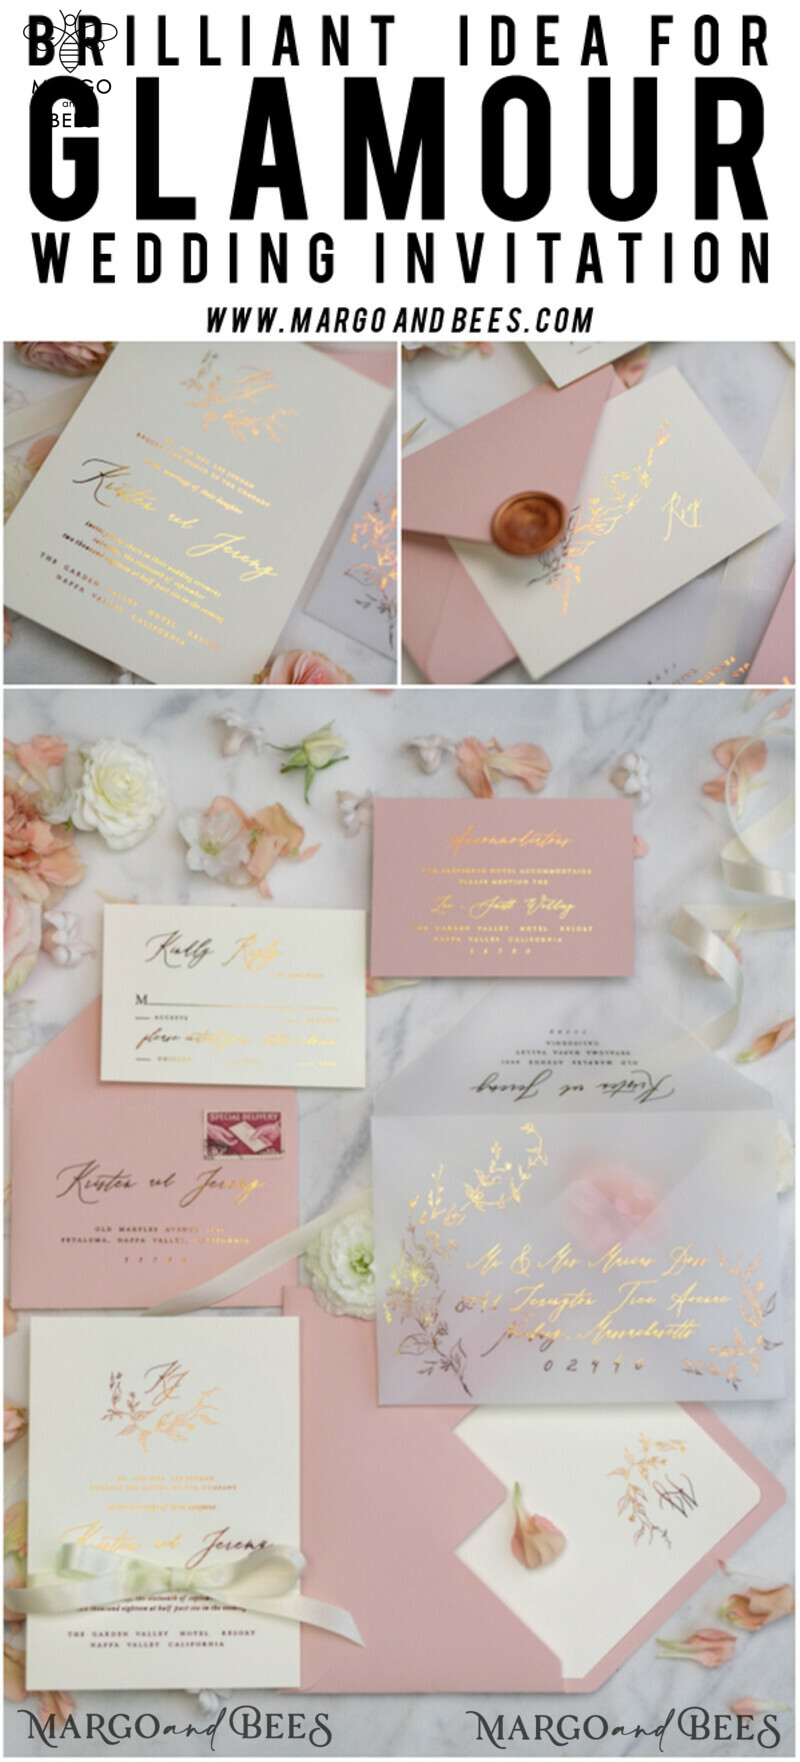 Stunning Blush Pink Wedding Invitations with Glamourous Gold Foil Accents and Elegant Vellum Details: A Bespoke Wedding Invitation Suite-42